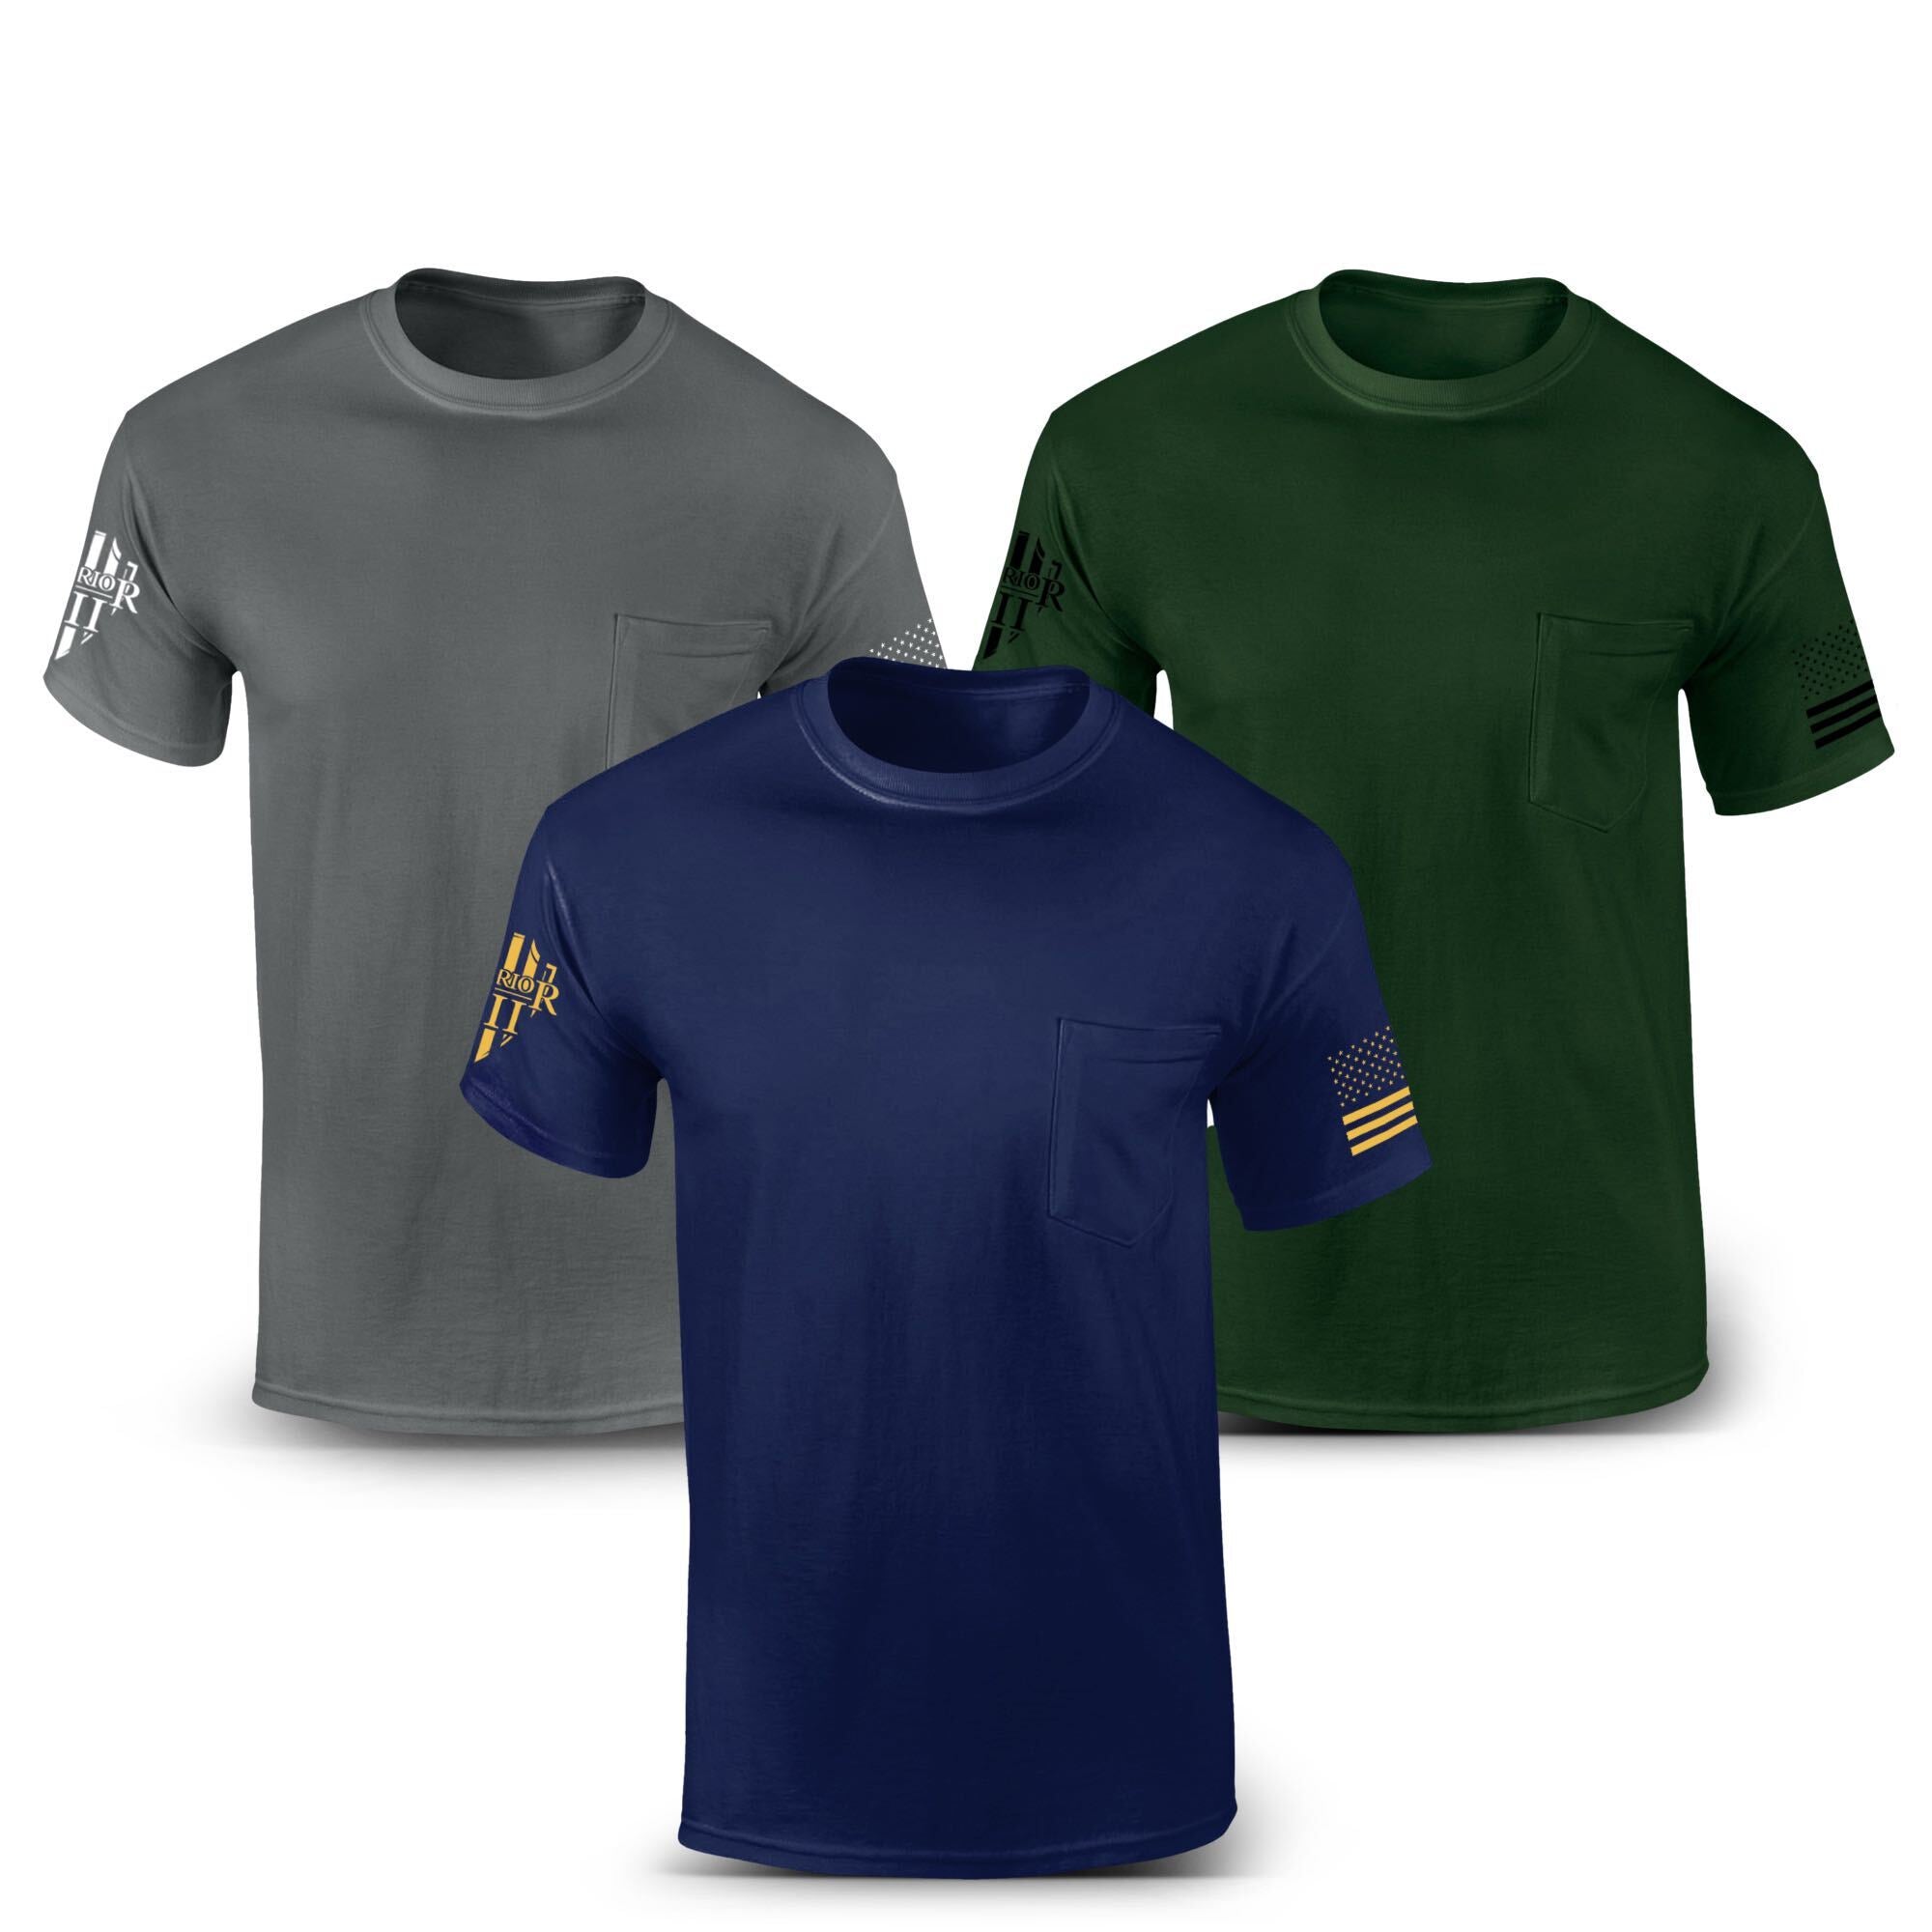 Grey, Navy, and Hunter Green pocket t-shirts with the Warrior 12 logo and American Flag on the sleeves.